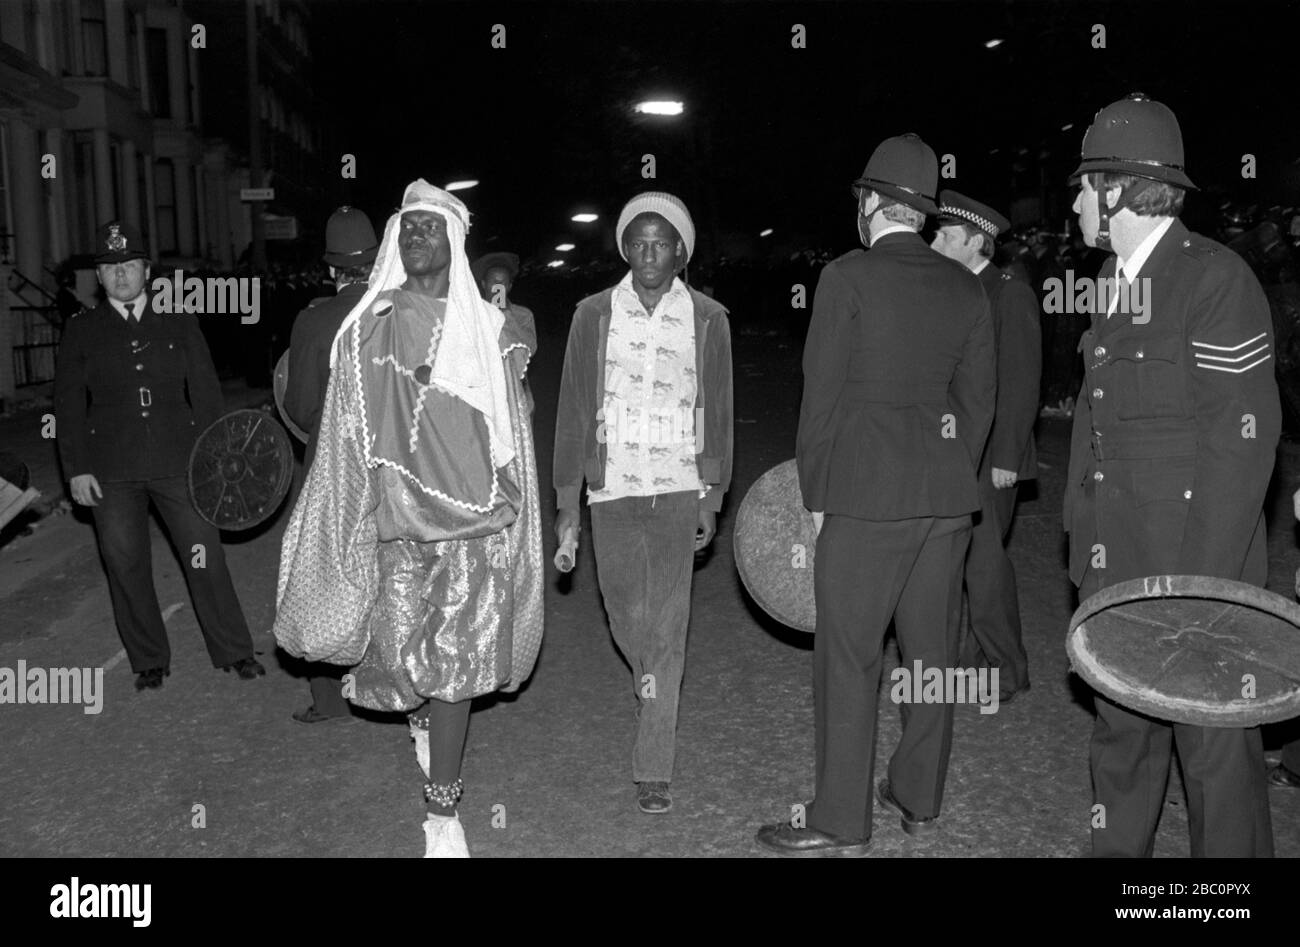 Notting Hill Carnival 1980s. Police use dustbin lids as shield as trouble, begins. Two revellers walk through group of police. 1981  HOMER SYKES Stock Photo